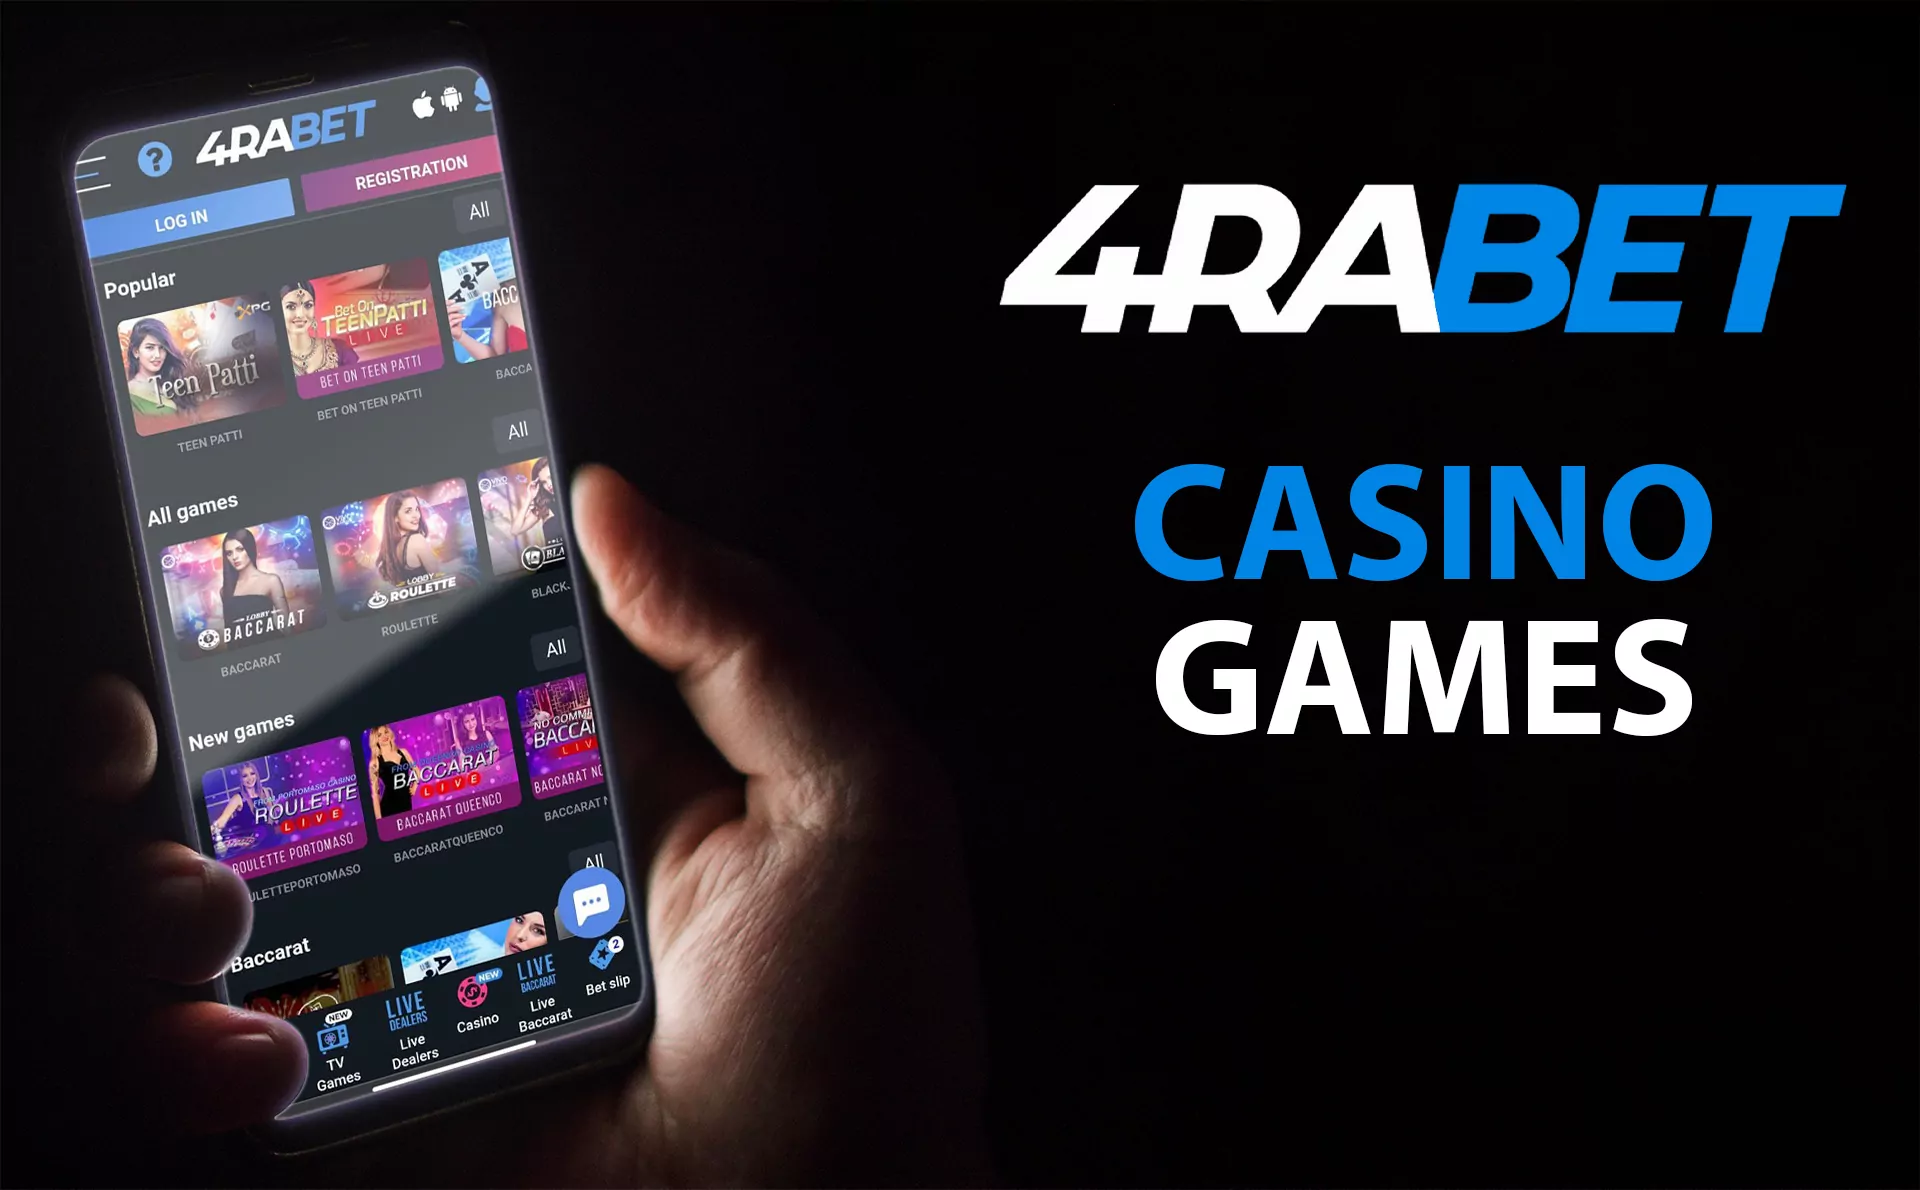 You can play all the favorite types of caino games at 4rabet.